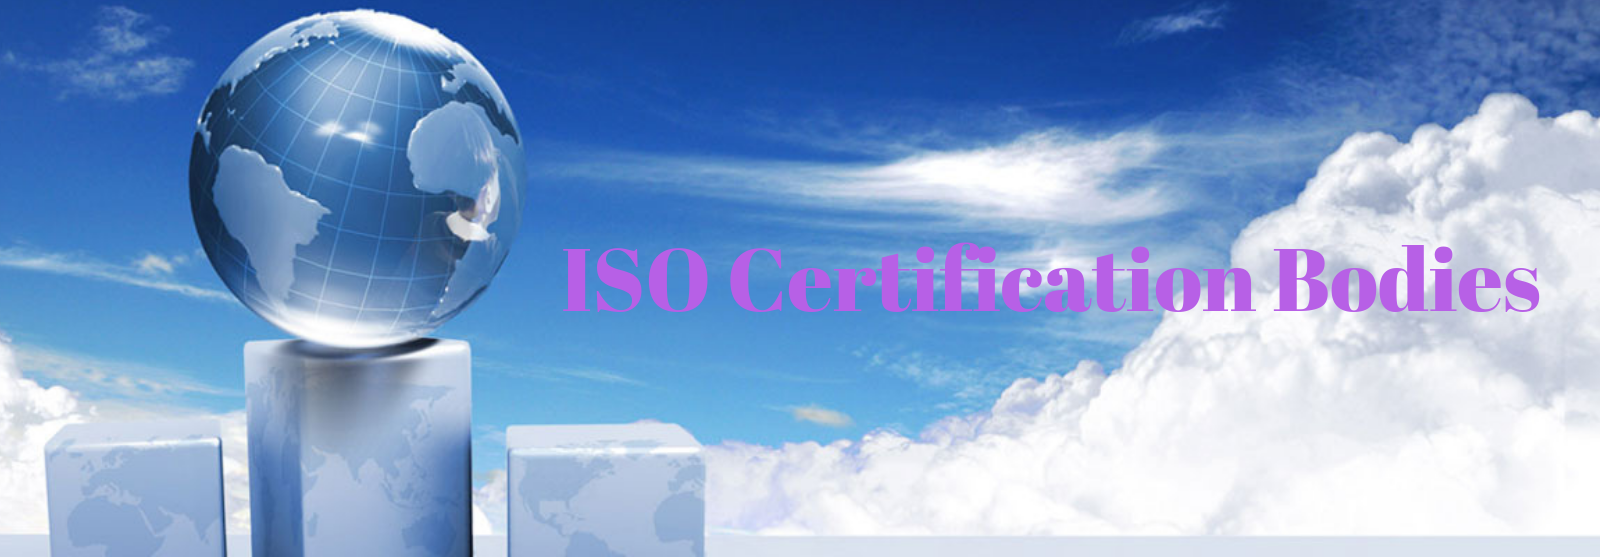 ISO certification bodies